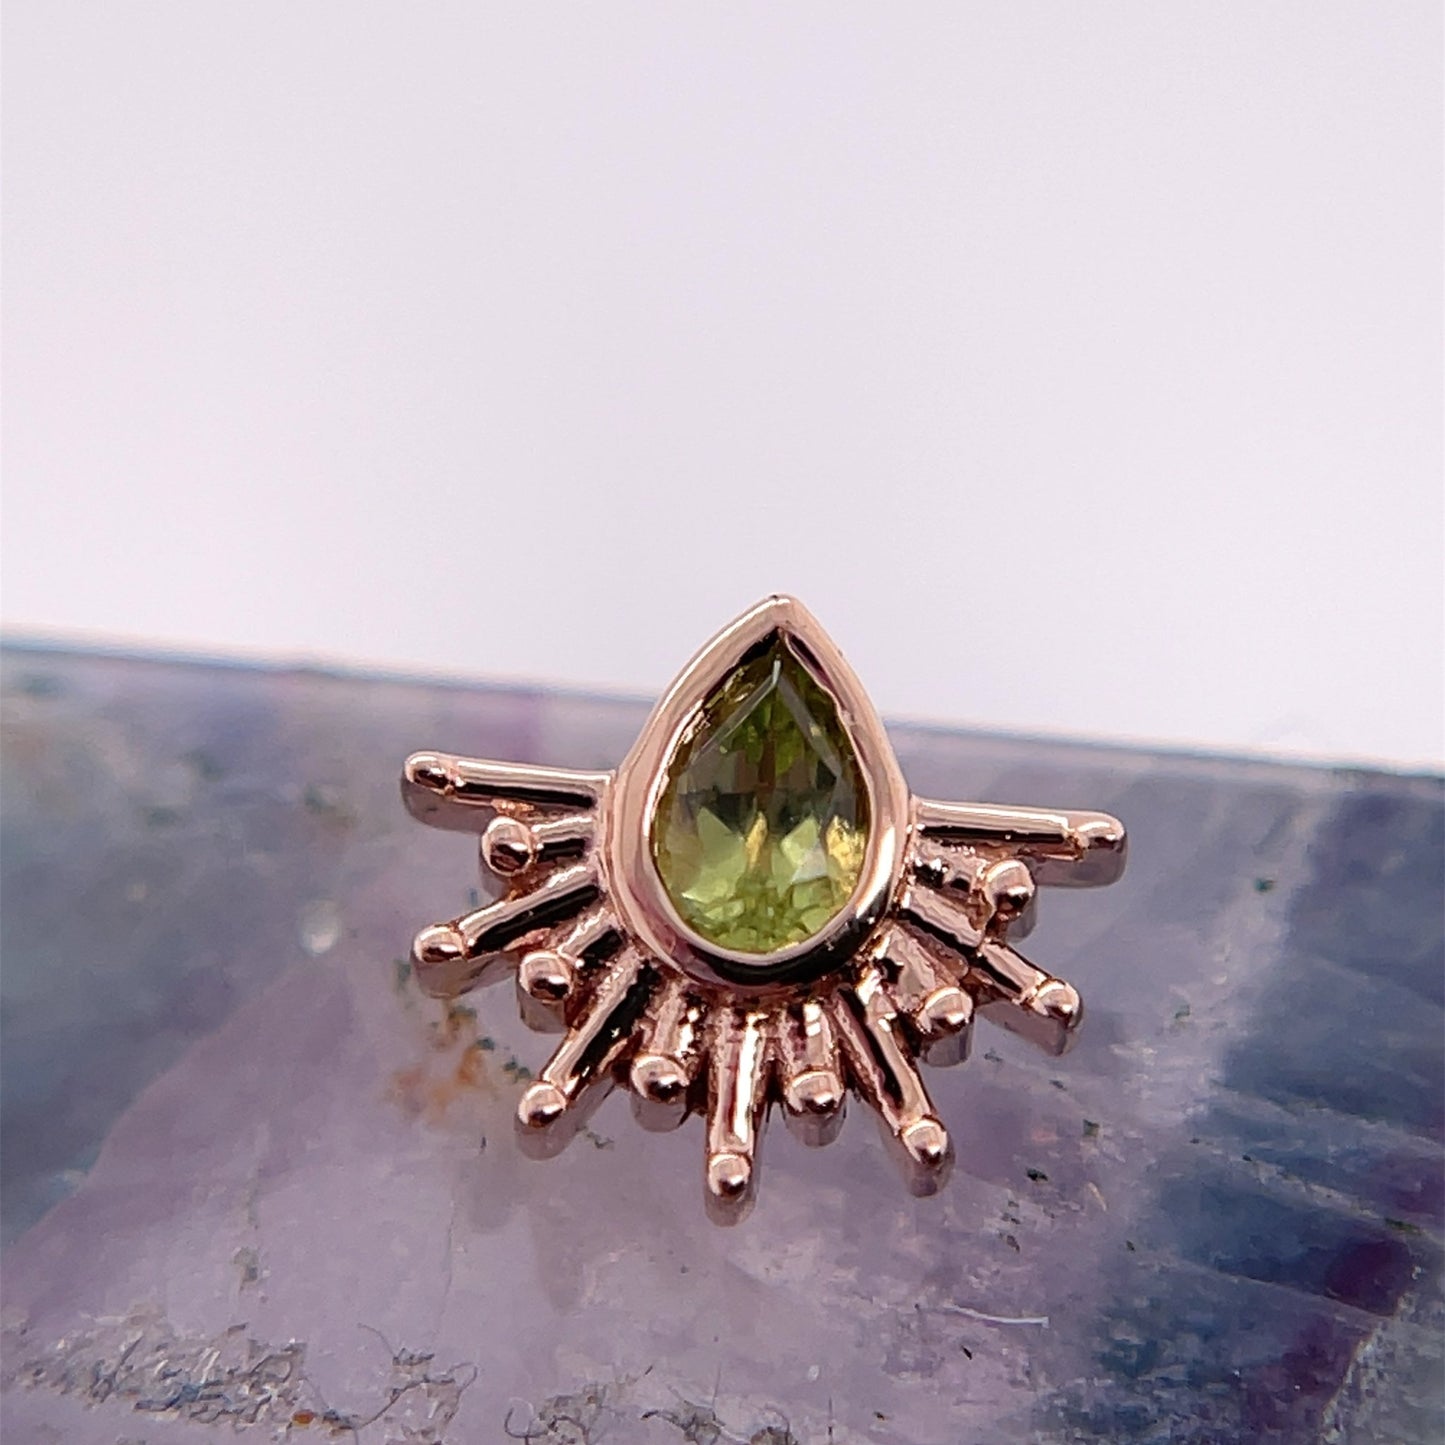 Borderline with Pear Bezel - Threaded - Agave in Bloom